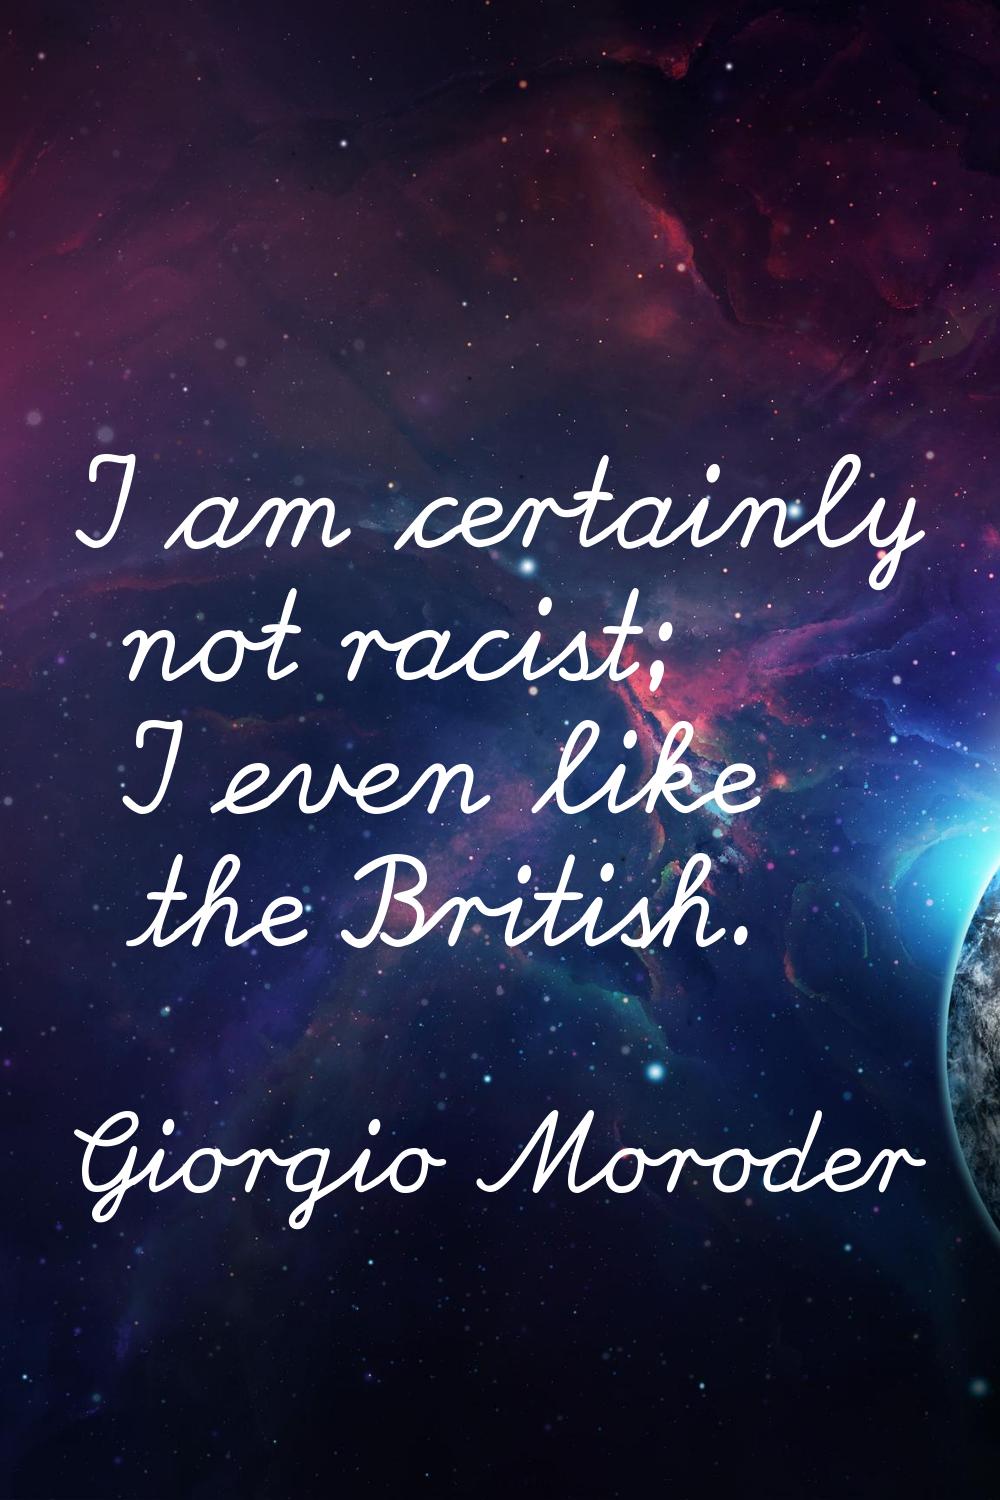 I am certainly not racist; I even like the British.